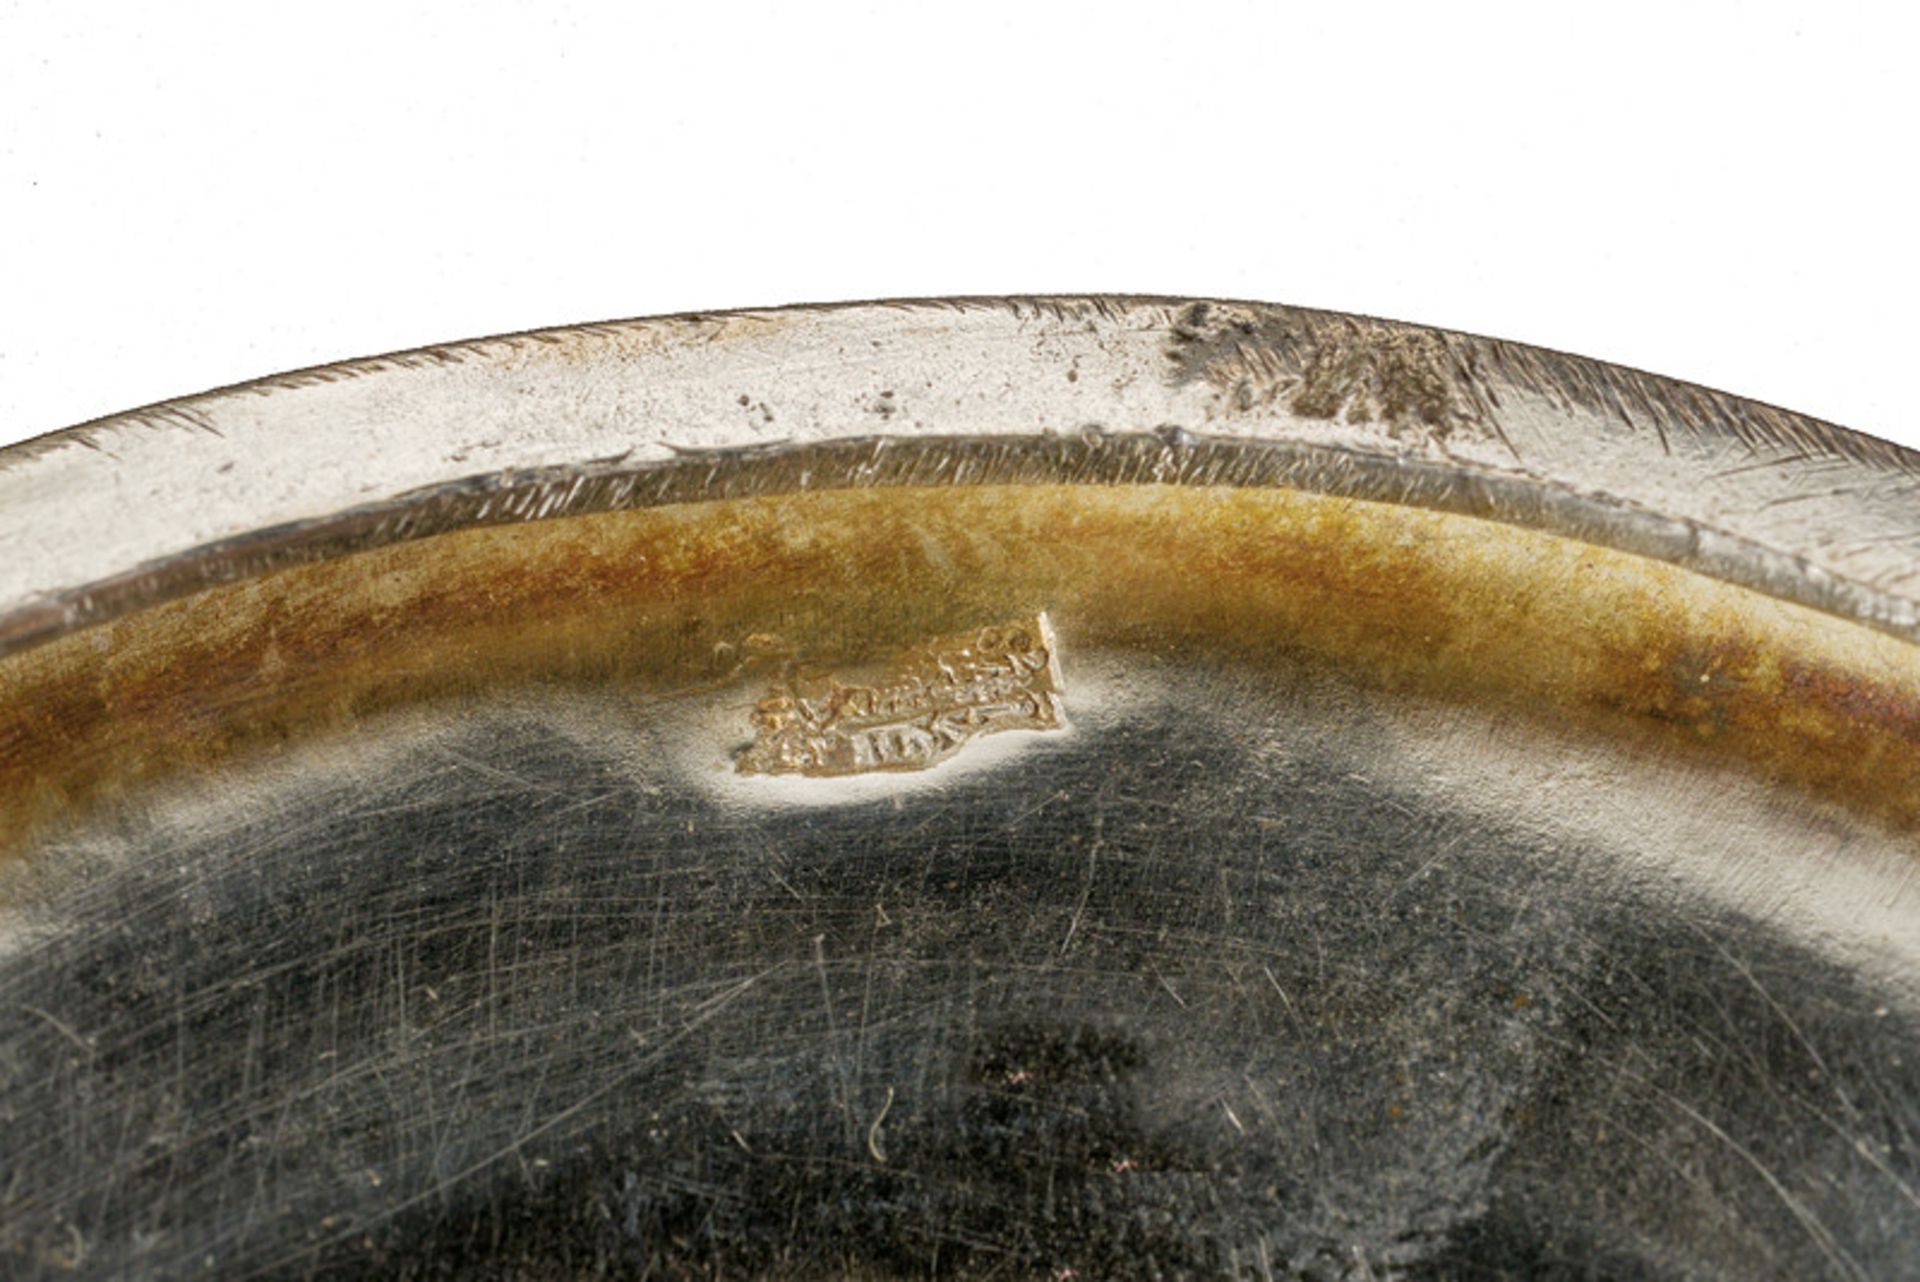 A fine pair of silver high footed bowls dating: 19th Century provenance: China On a wide base, the - Image 7 of 7